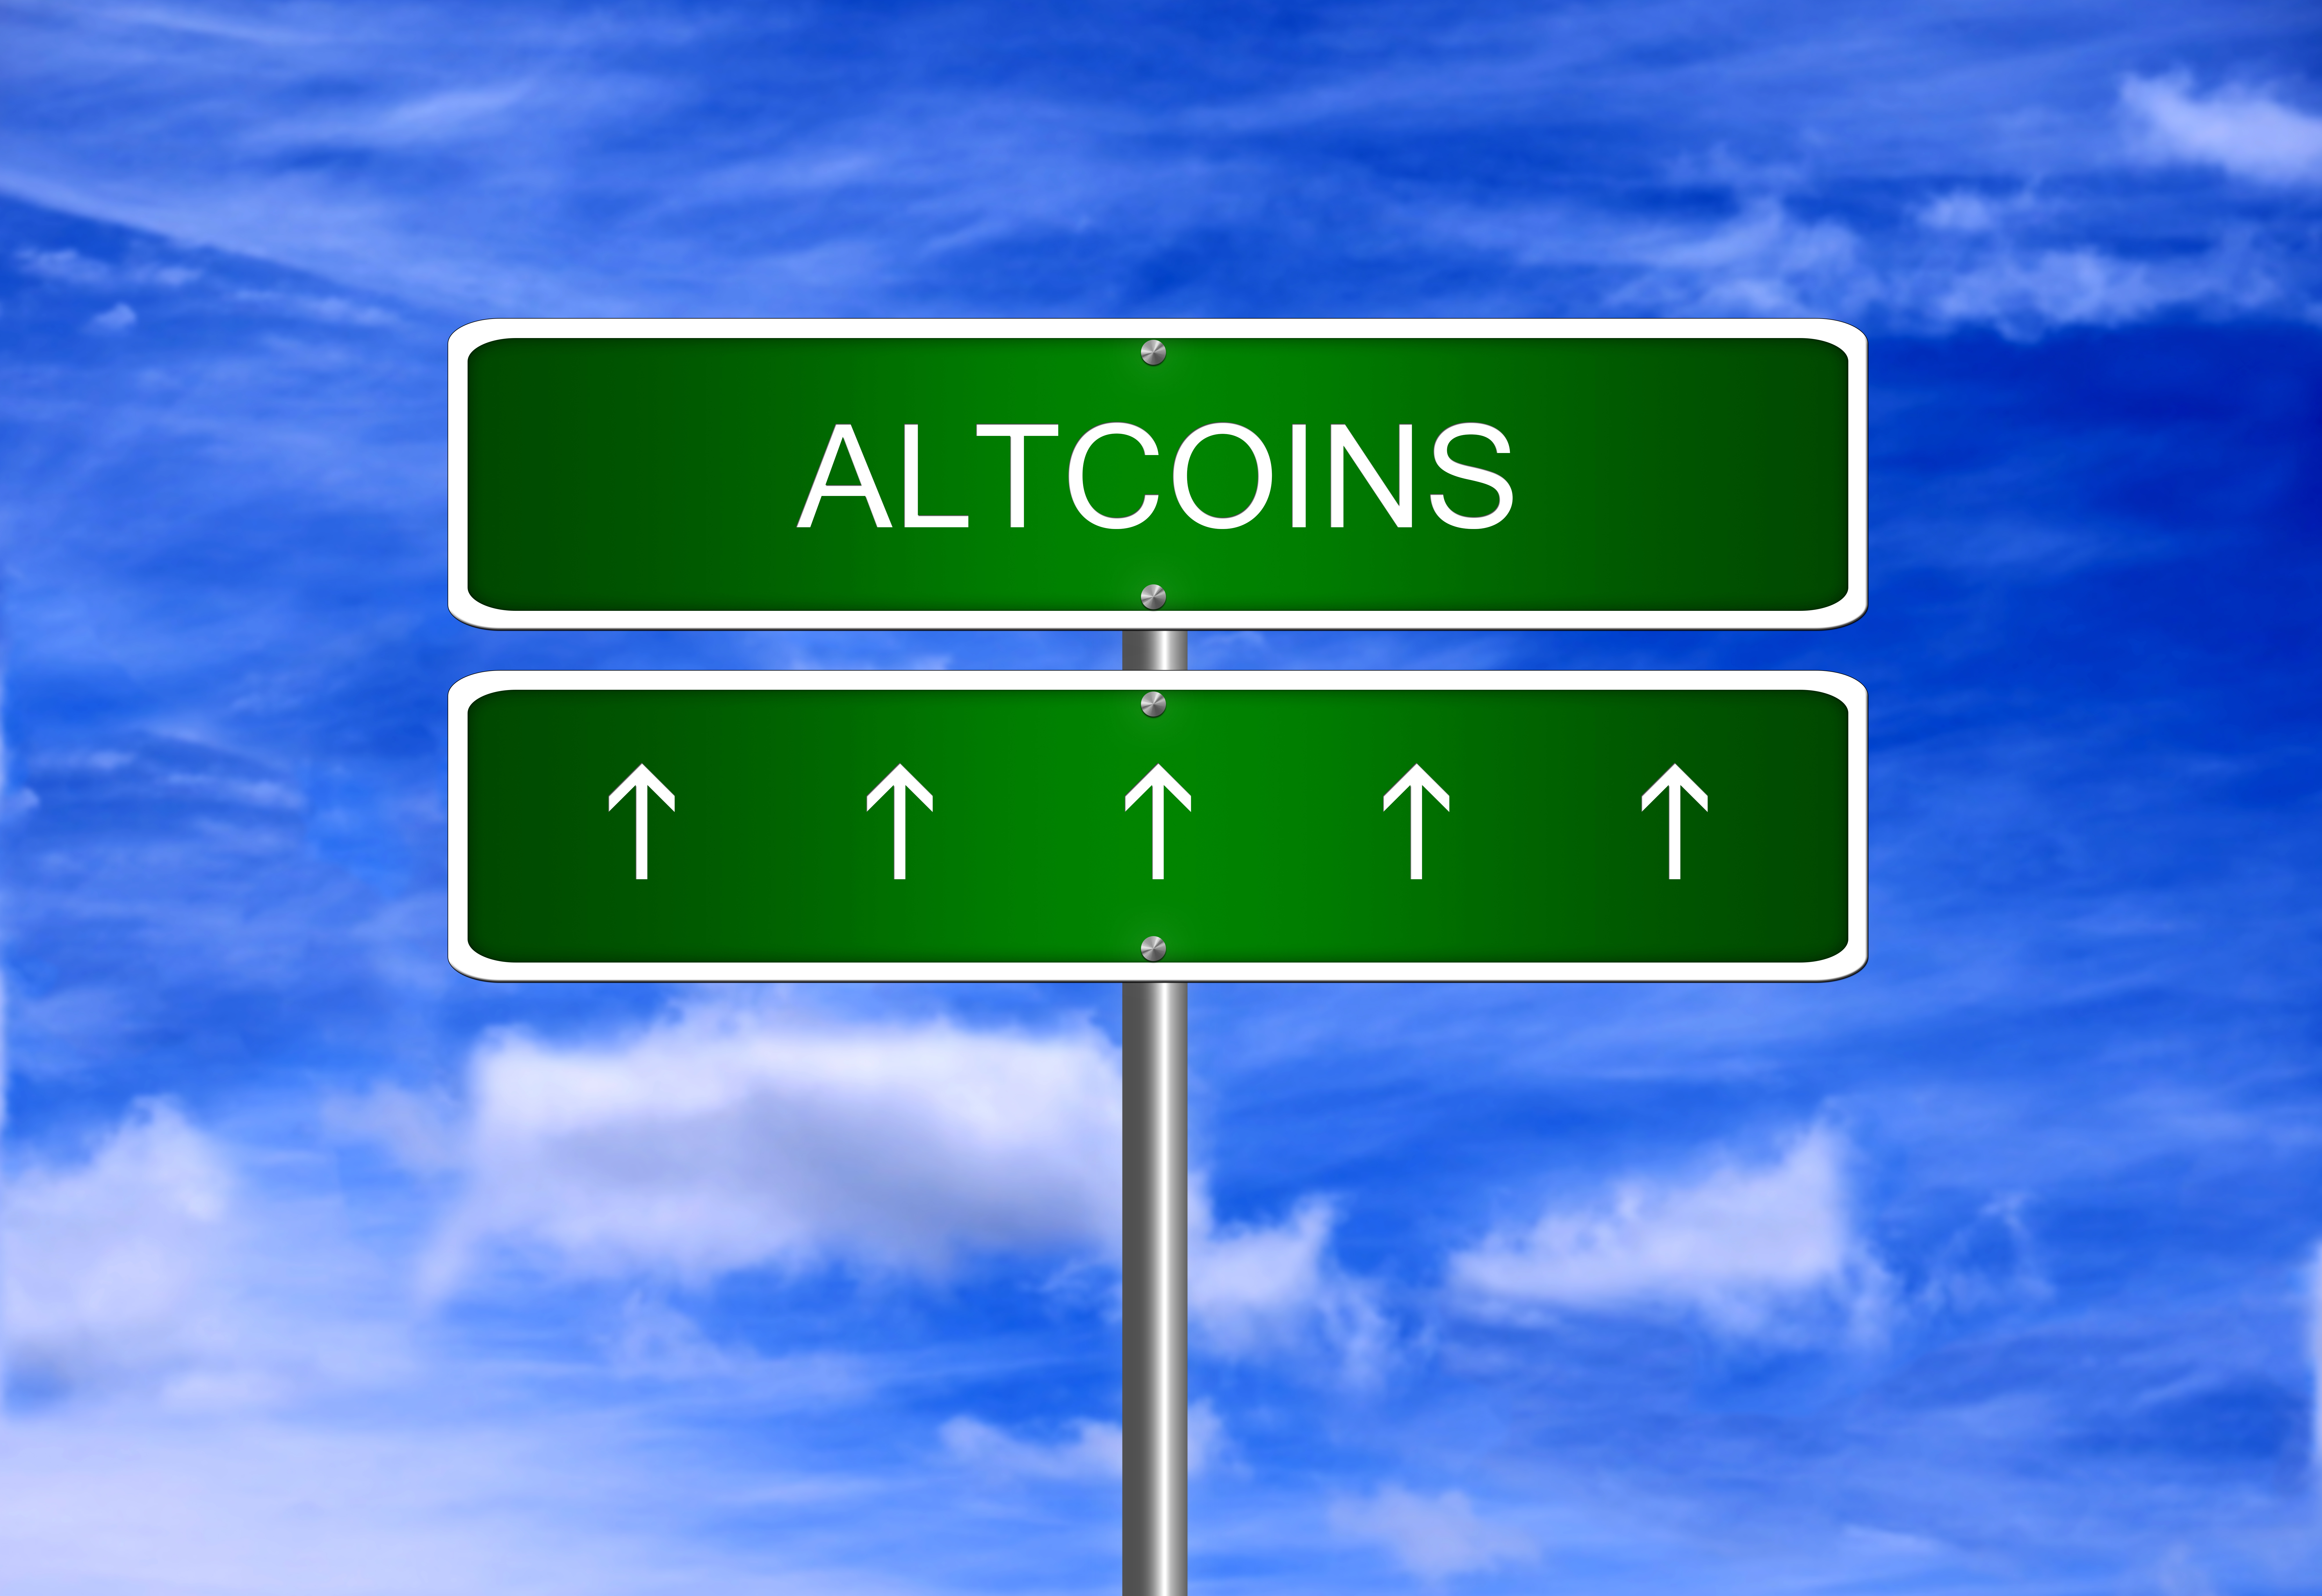 Altcoin Accumulation Is Nearly Over, According To This Schematic